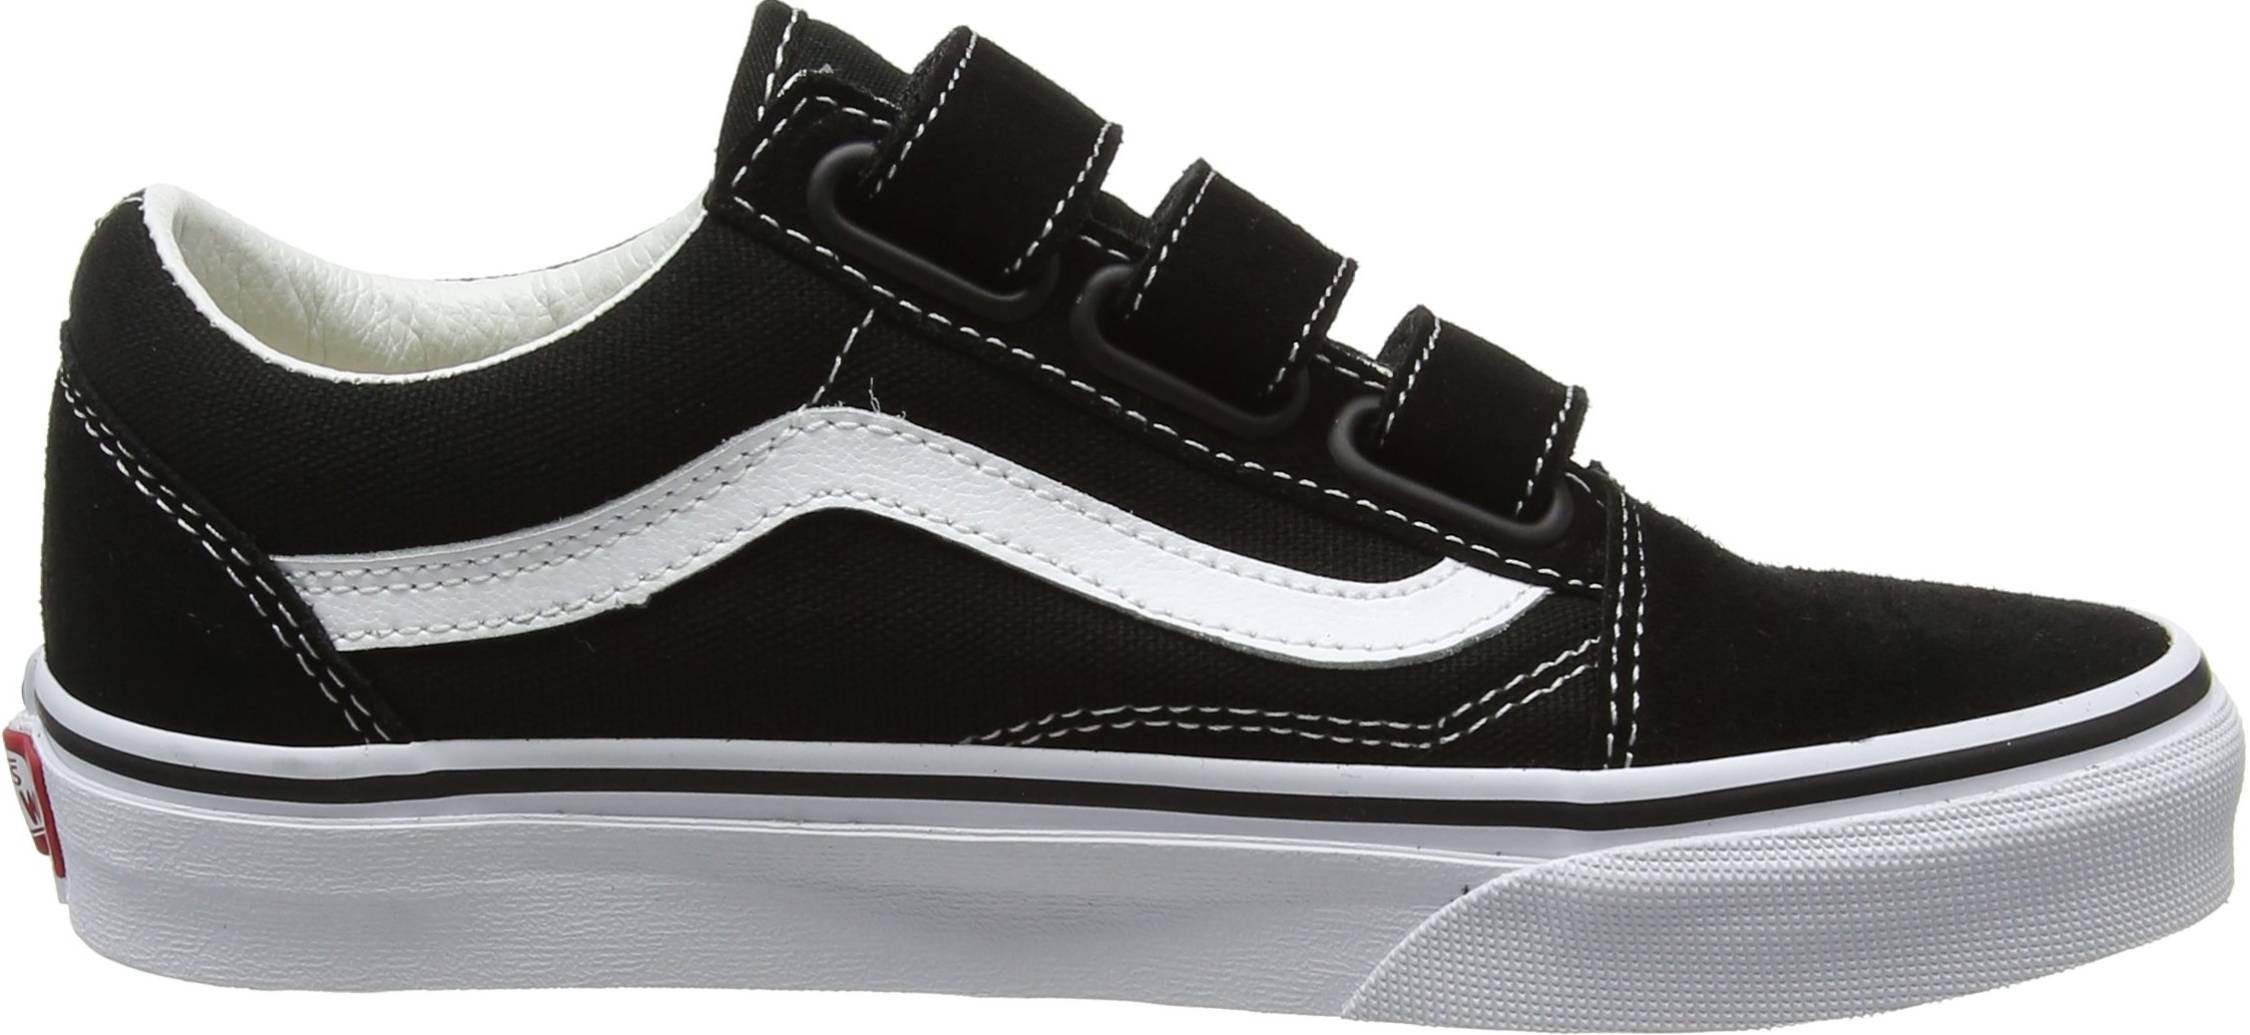 9 Reasons to/NOT to Buy Vans Suede Canvas Old Skool V (Aug 2021 ...